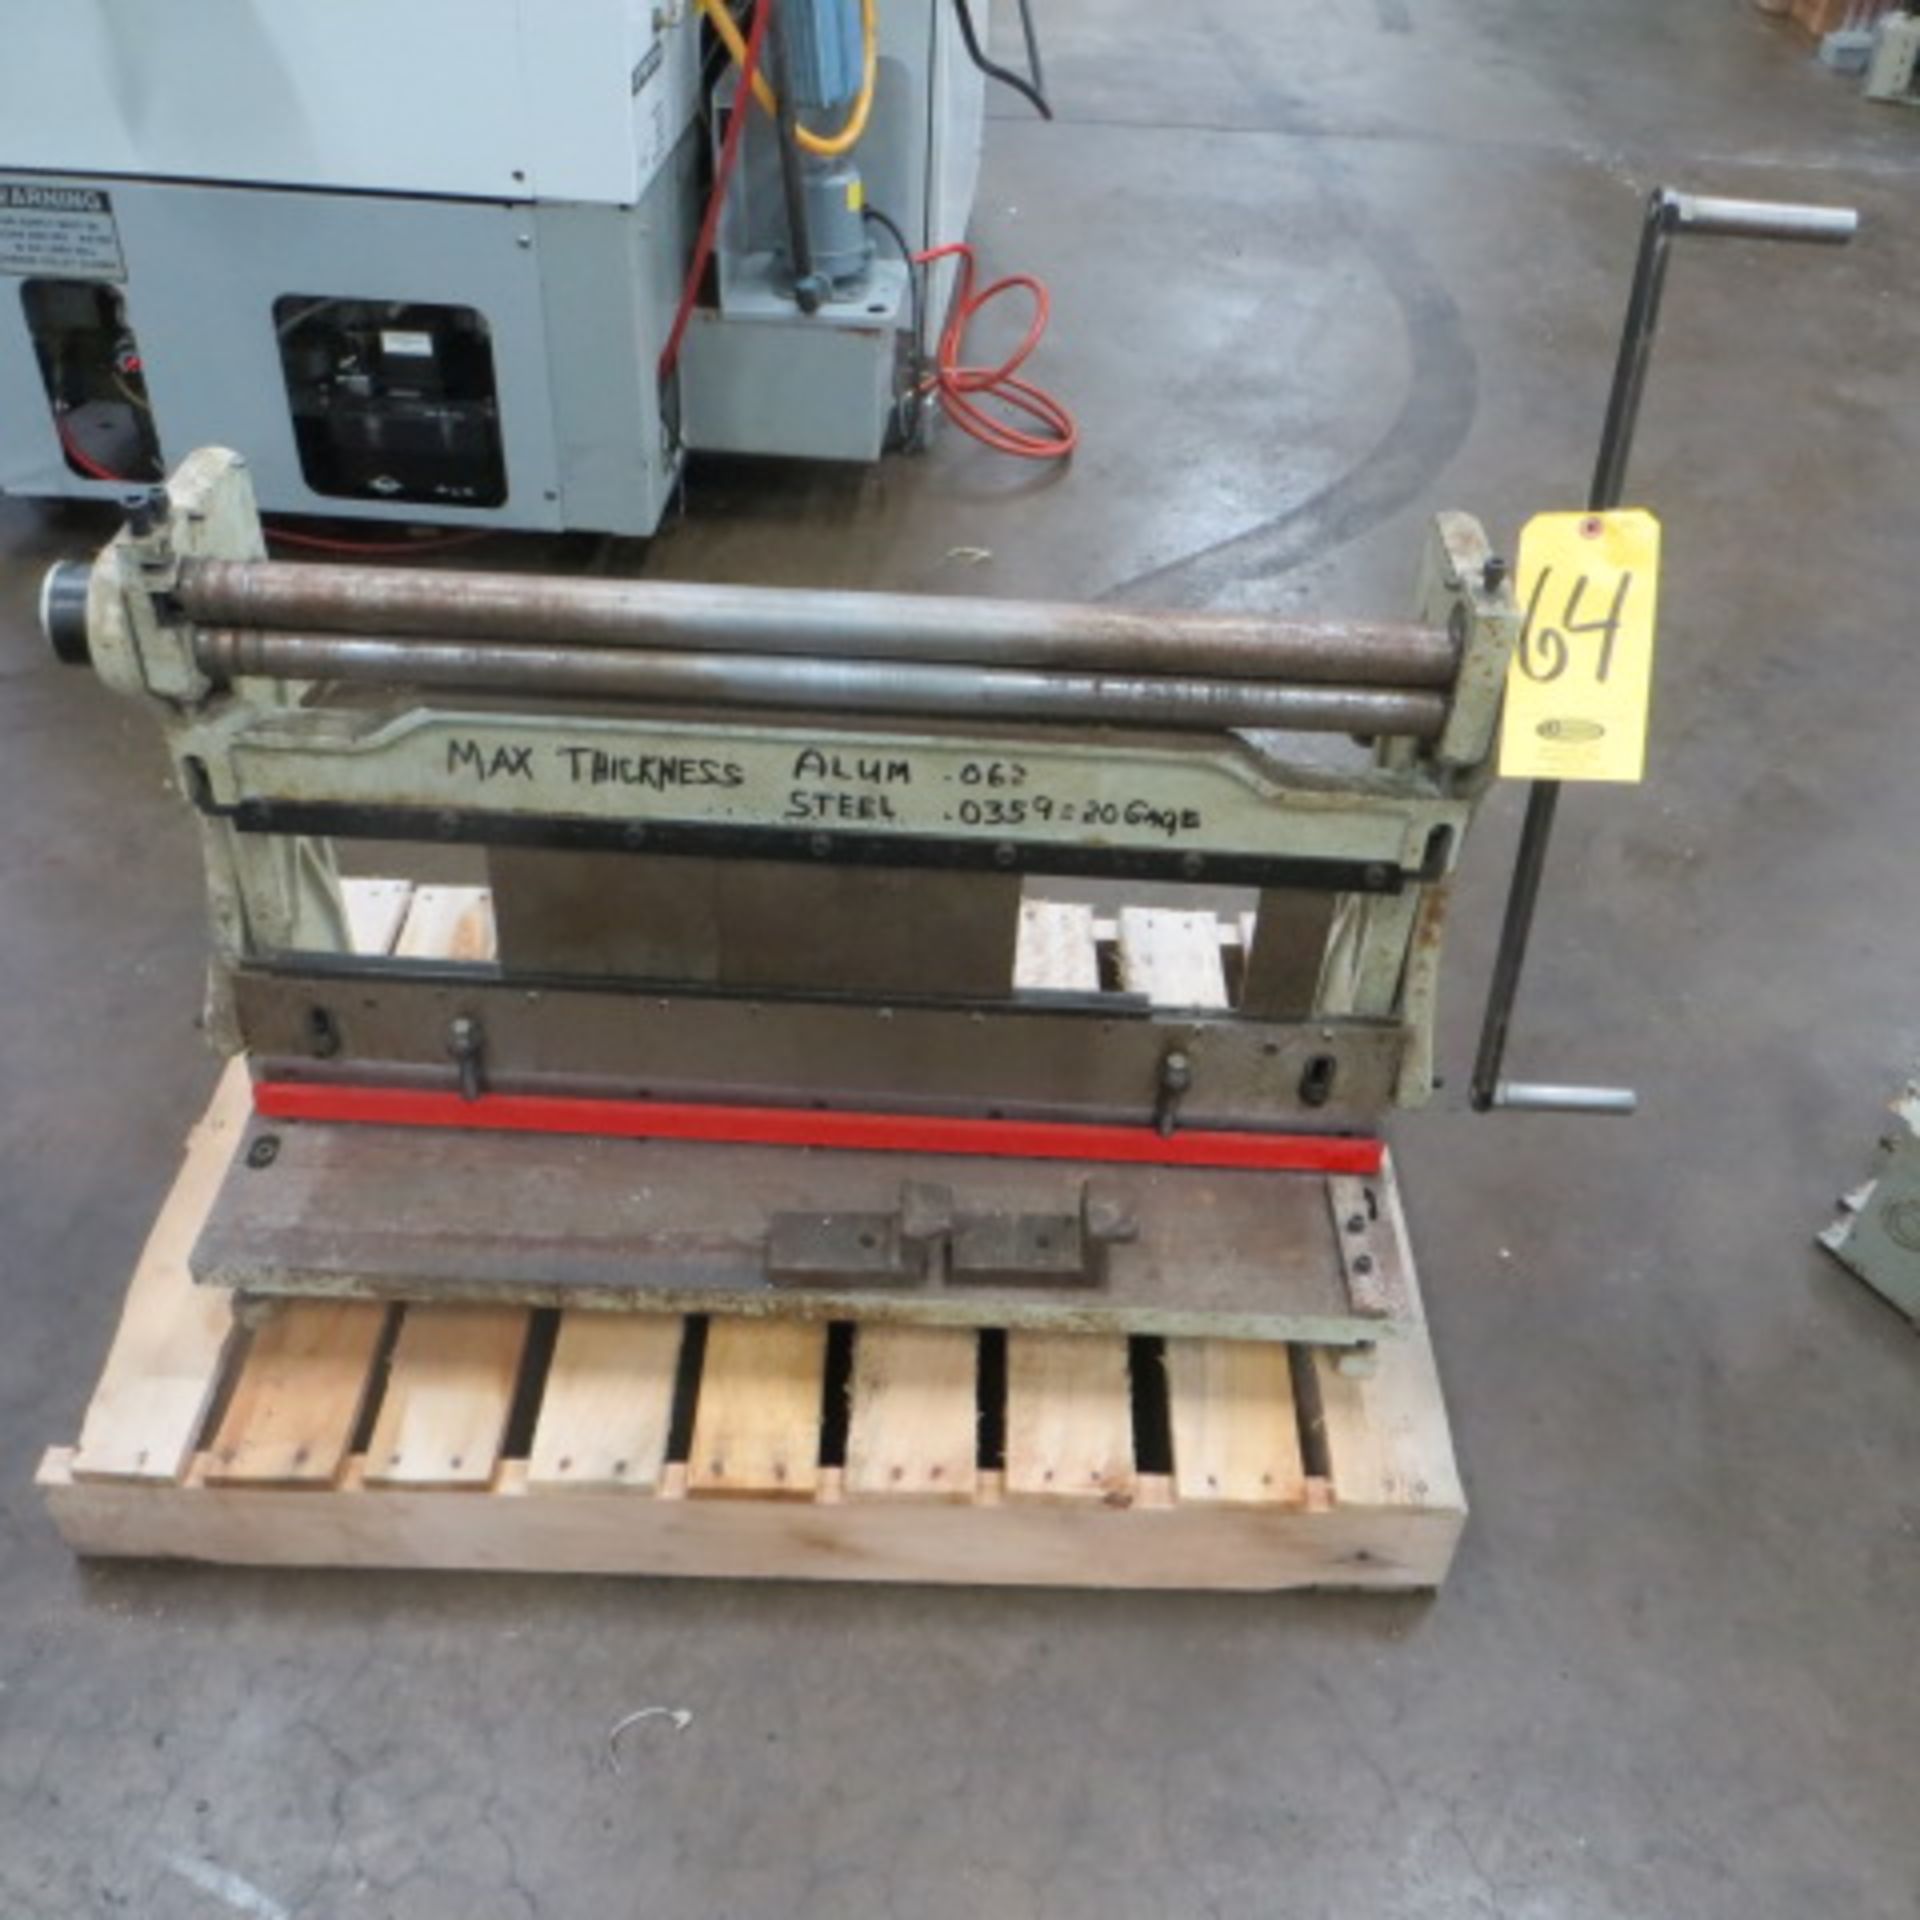 30 IN COMBO PINCH ROLLER/BRAKE/SHEAR, BELIEVED TO BE A JET-ROLL NEEDS BLOCK